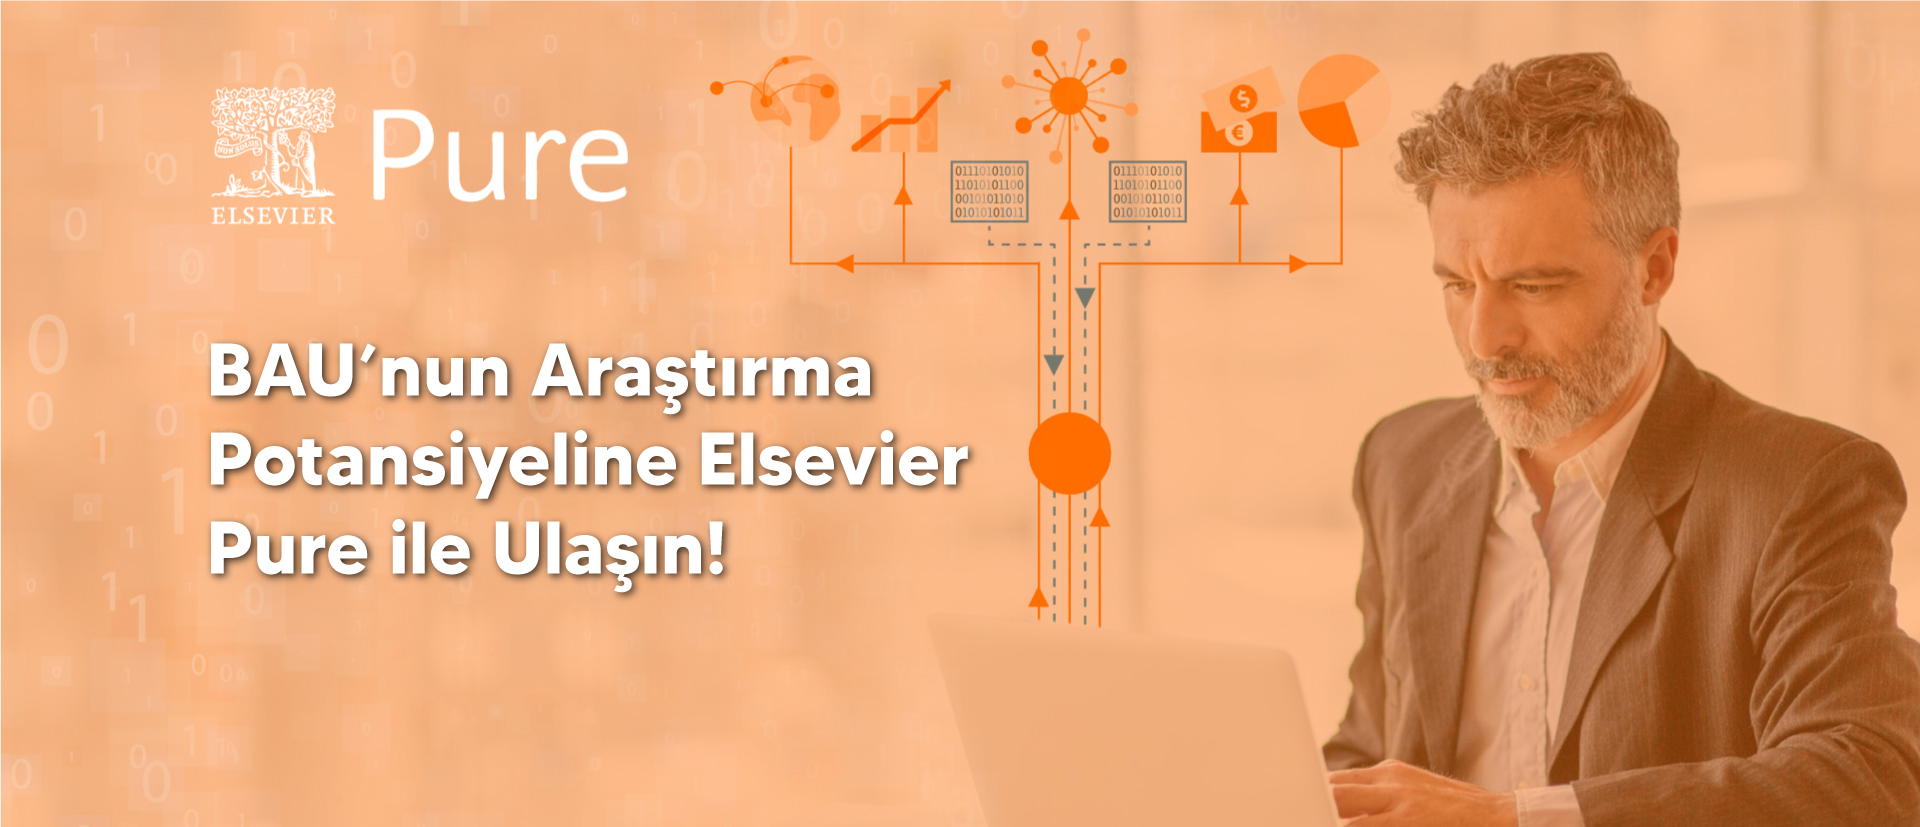 Elsevier Pure